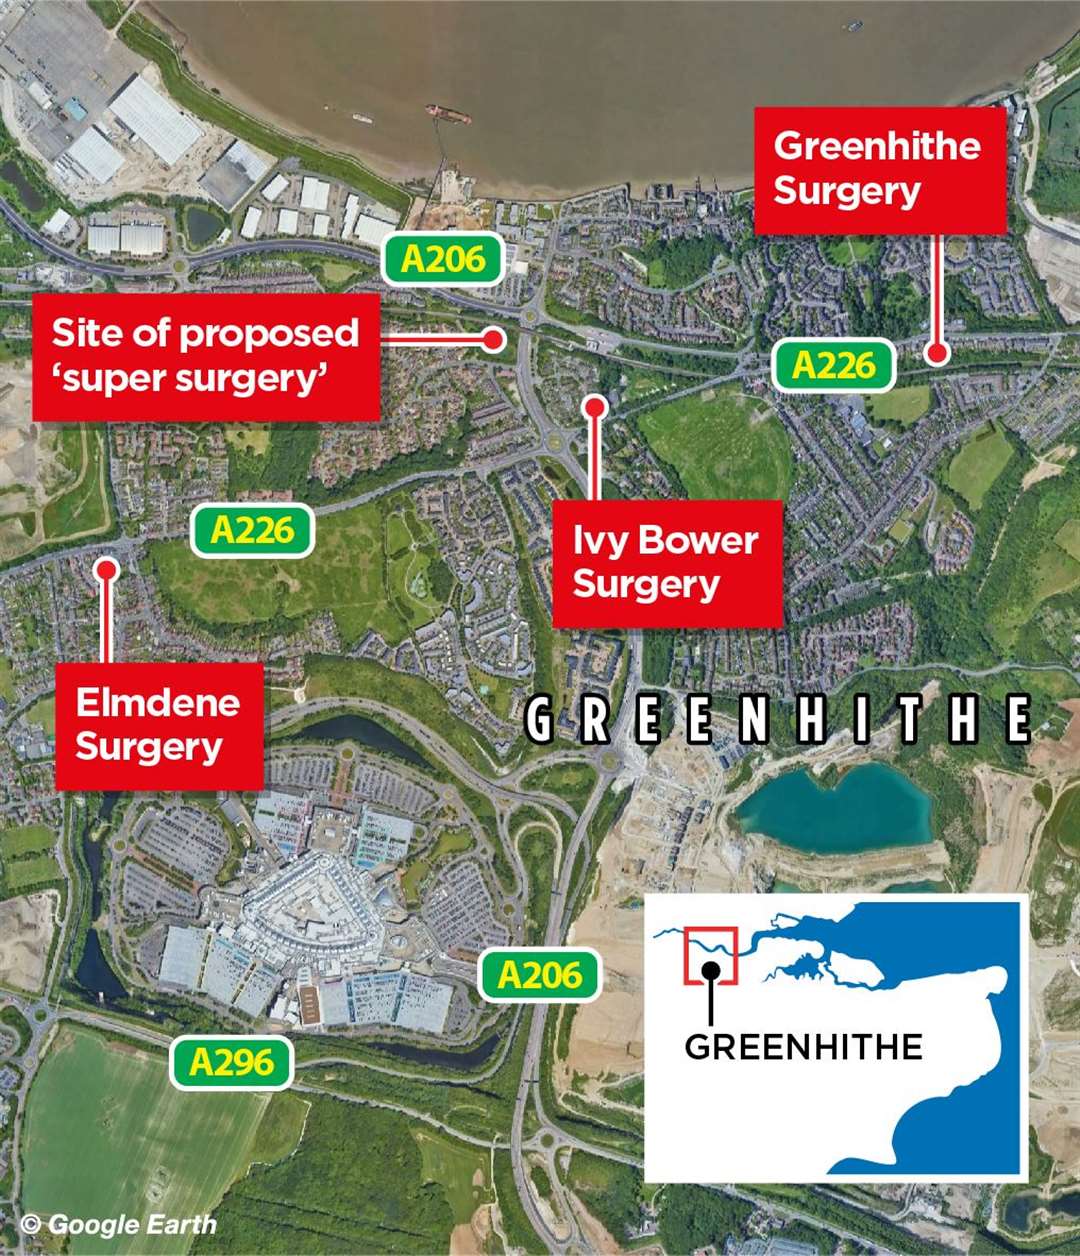 Where the proposed Greenhithe surgery is and the three existing surgeries are.